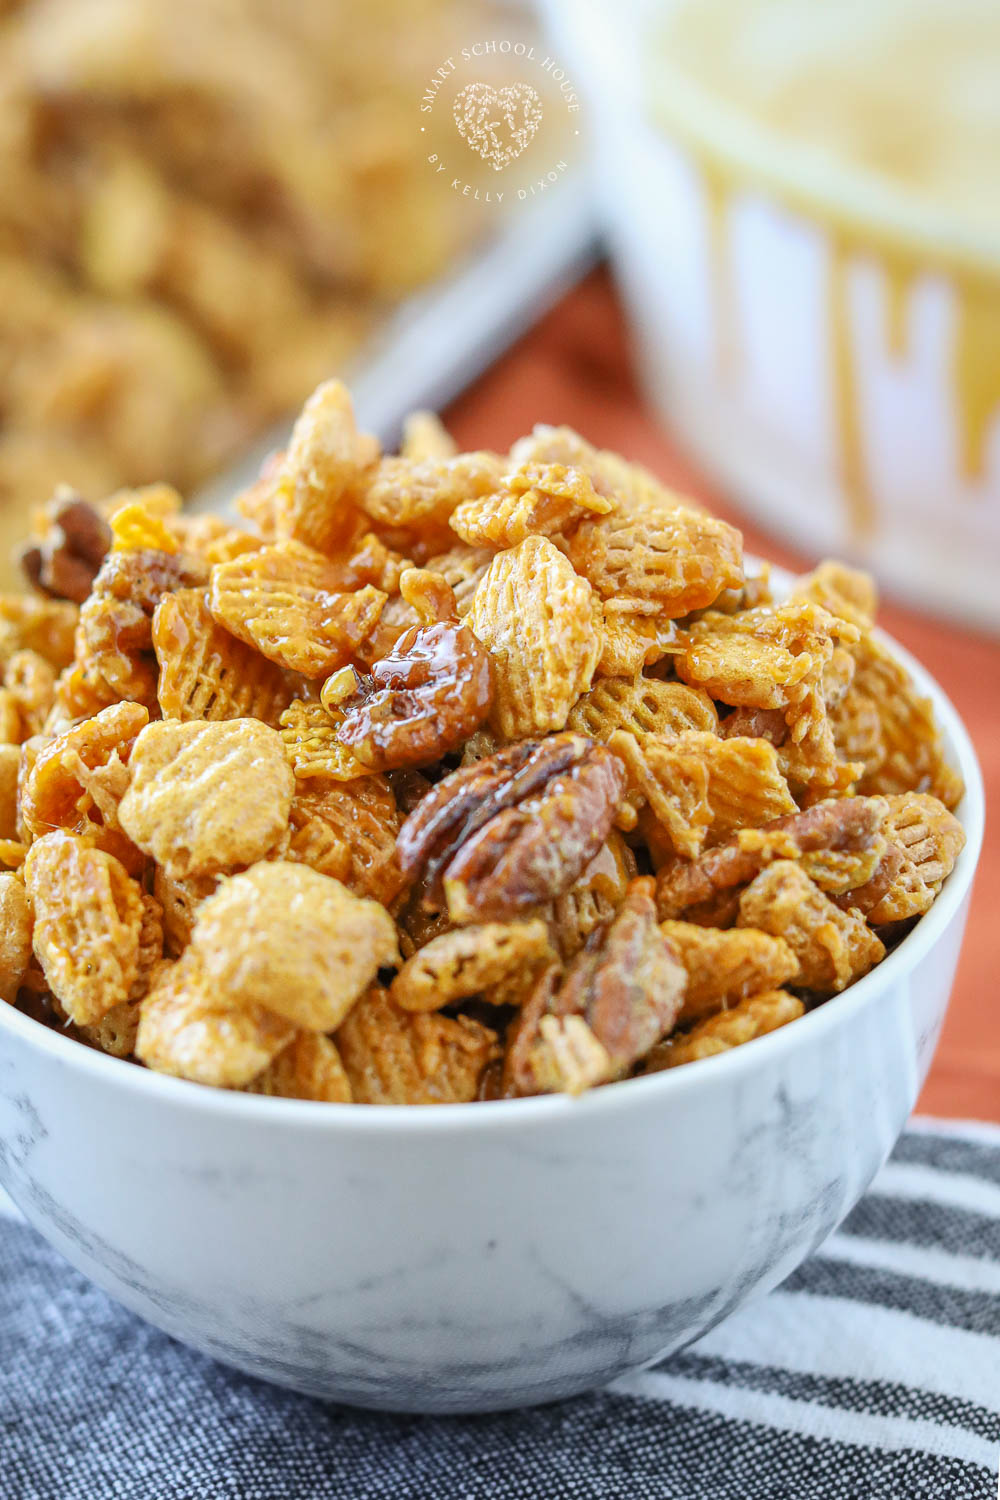 Praline crunch is sweet, salty, and deliciously addicting! Crispix and pecans are covered in a fluffy, buttery, and sugary coating.